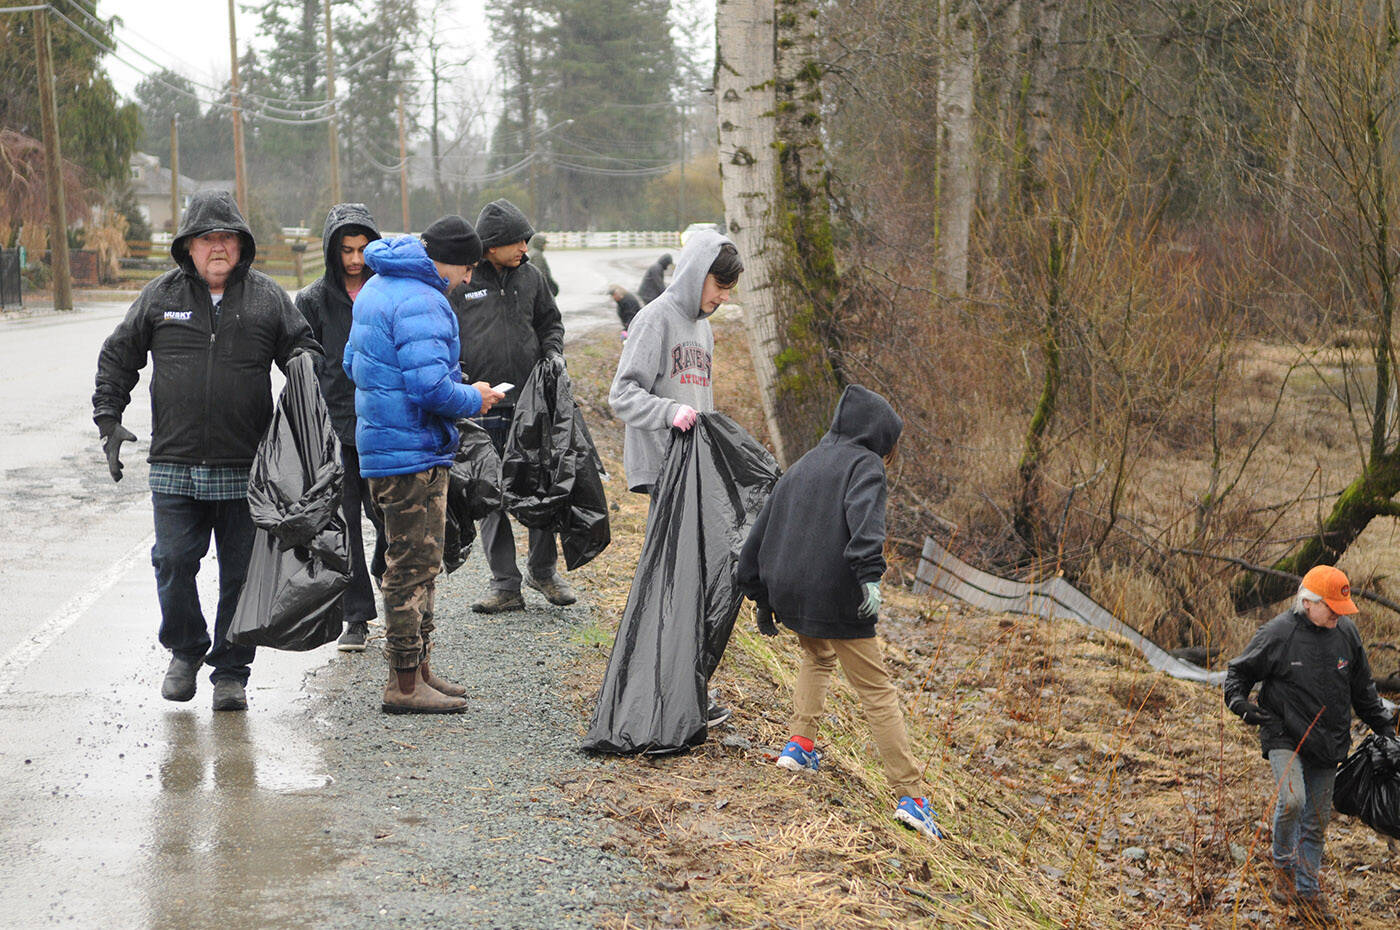 A team of about 15 people helped clean up a stretch of Hope River Road in Chilliwack on Saturday, Jan. 21, 2023. (Jenna Hauck/ Chilliwack Progress)